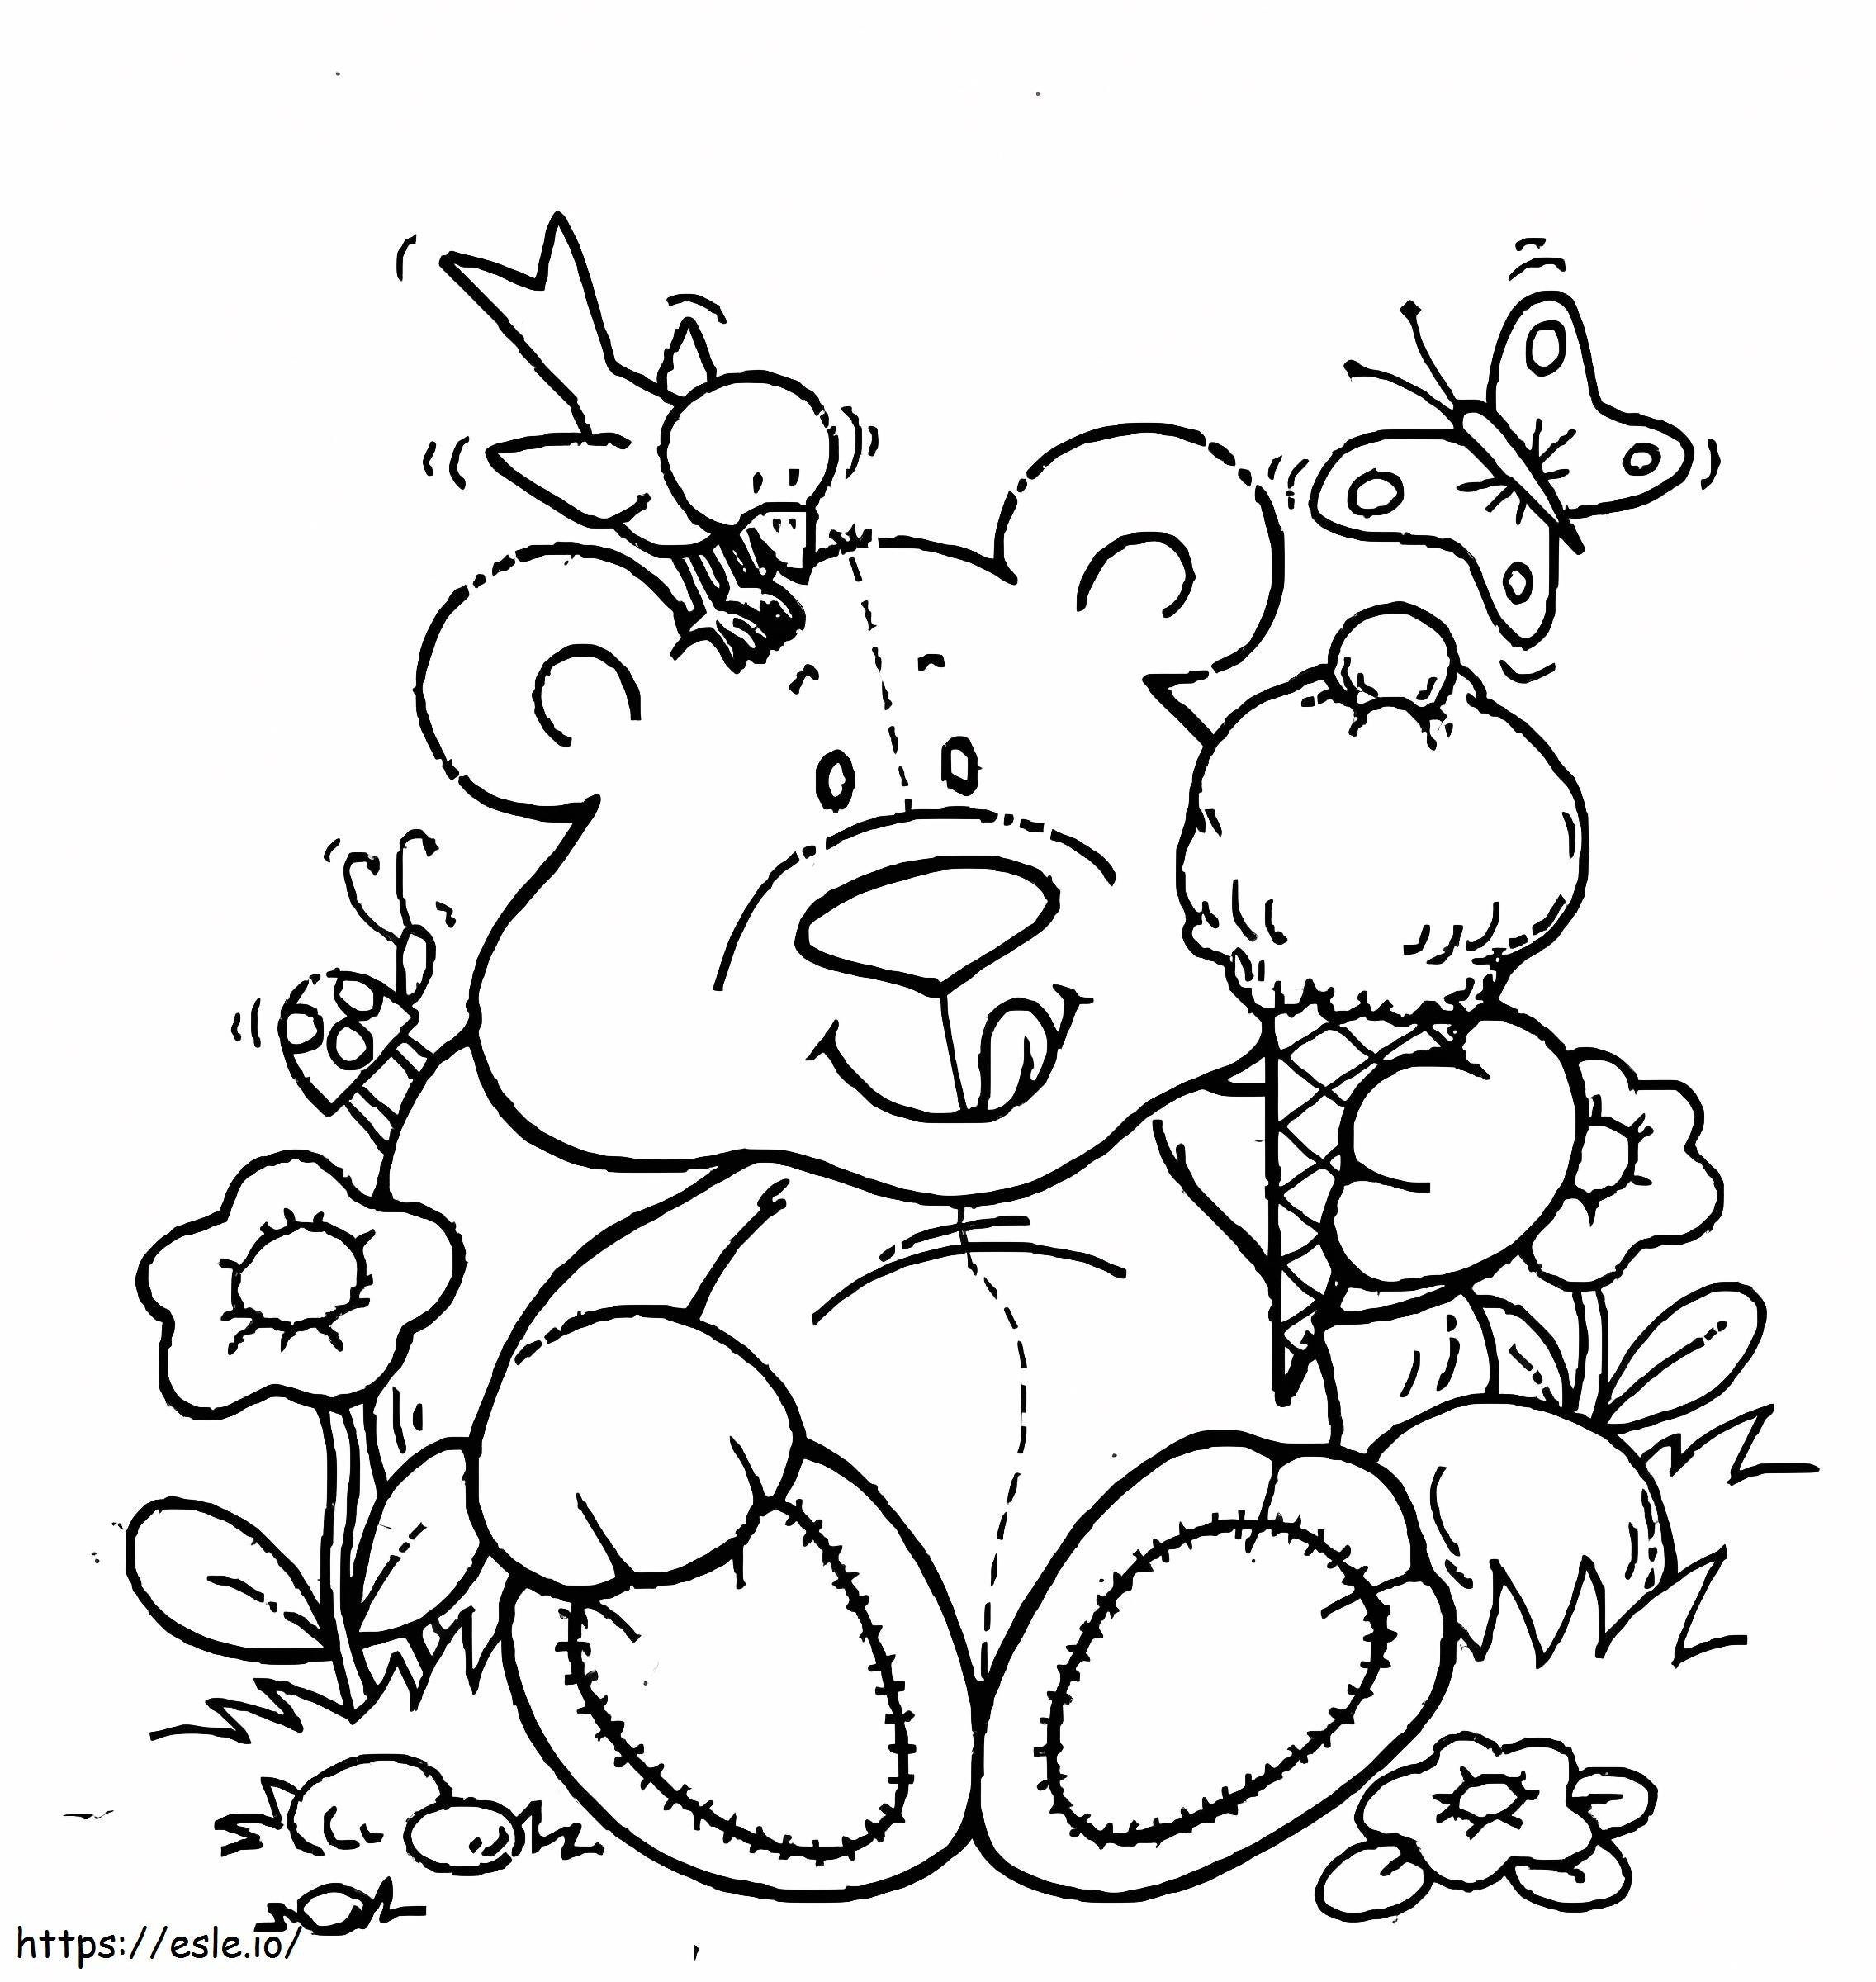 Teddy Bear For Kids coloring page